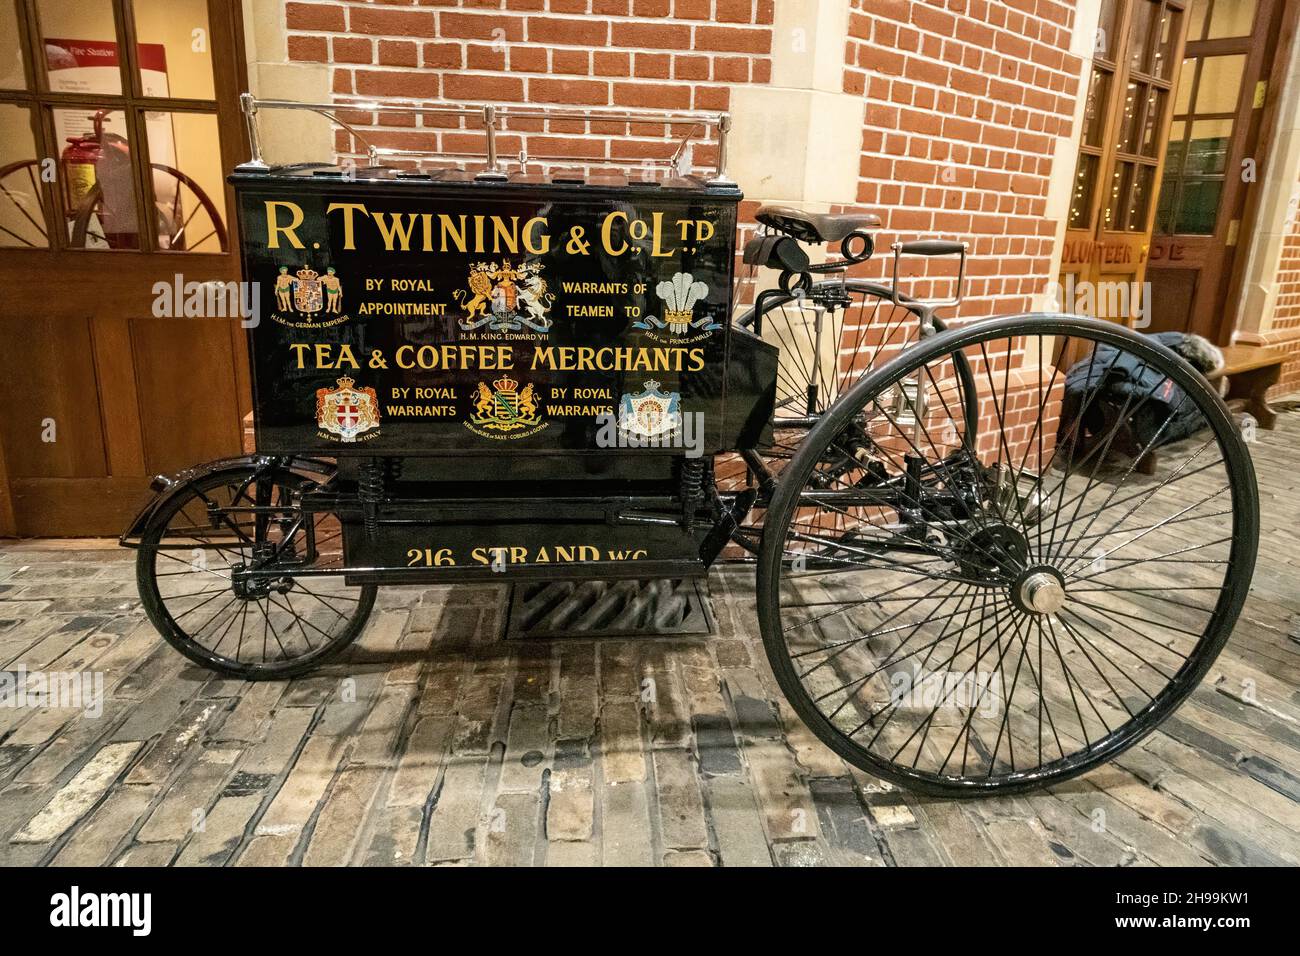 R. Twining & Co Ltd tea and coffee merchants vintage tricycle and cart at Milestones Living History Museum in Basingstoke, Hampshire, England, UK Stock Photo